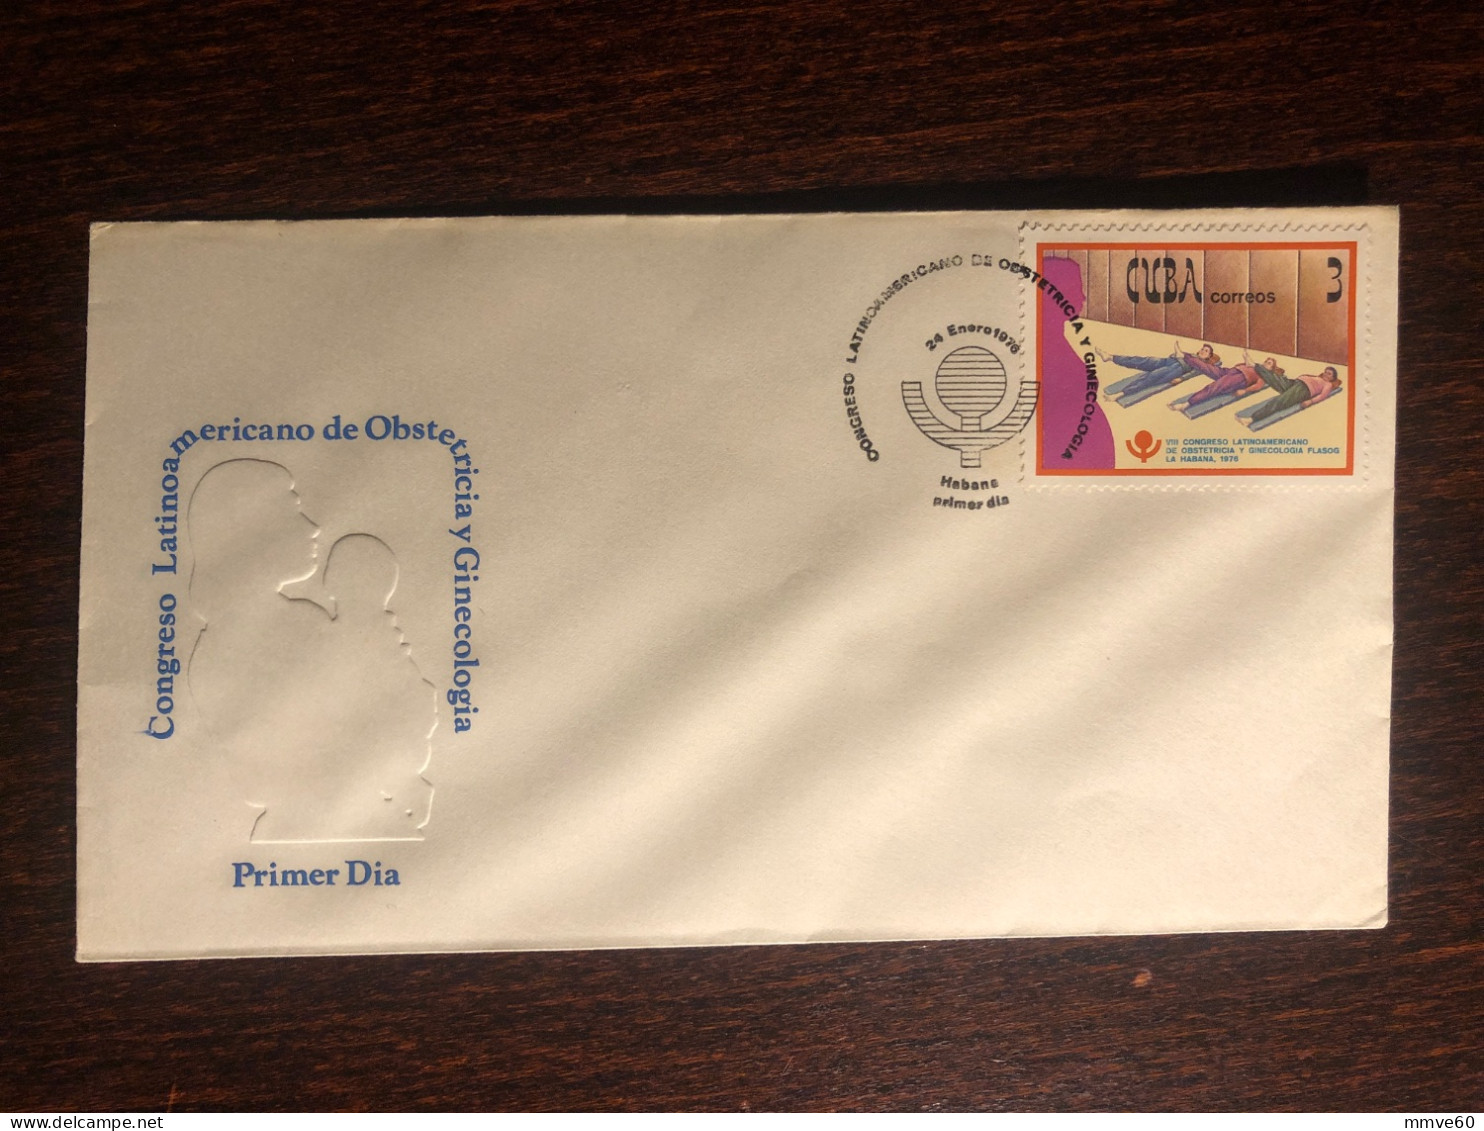 CUBA FDC COVER 1976 YEAR GYNECOLOGY AND OBSTETRICS HEALTH MEDICINE STAMP - Briefe U. Dokumente